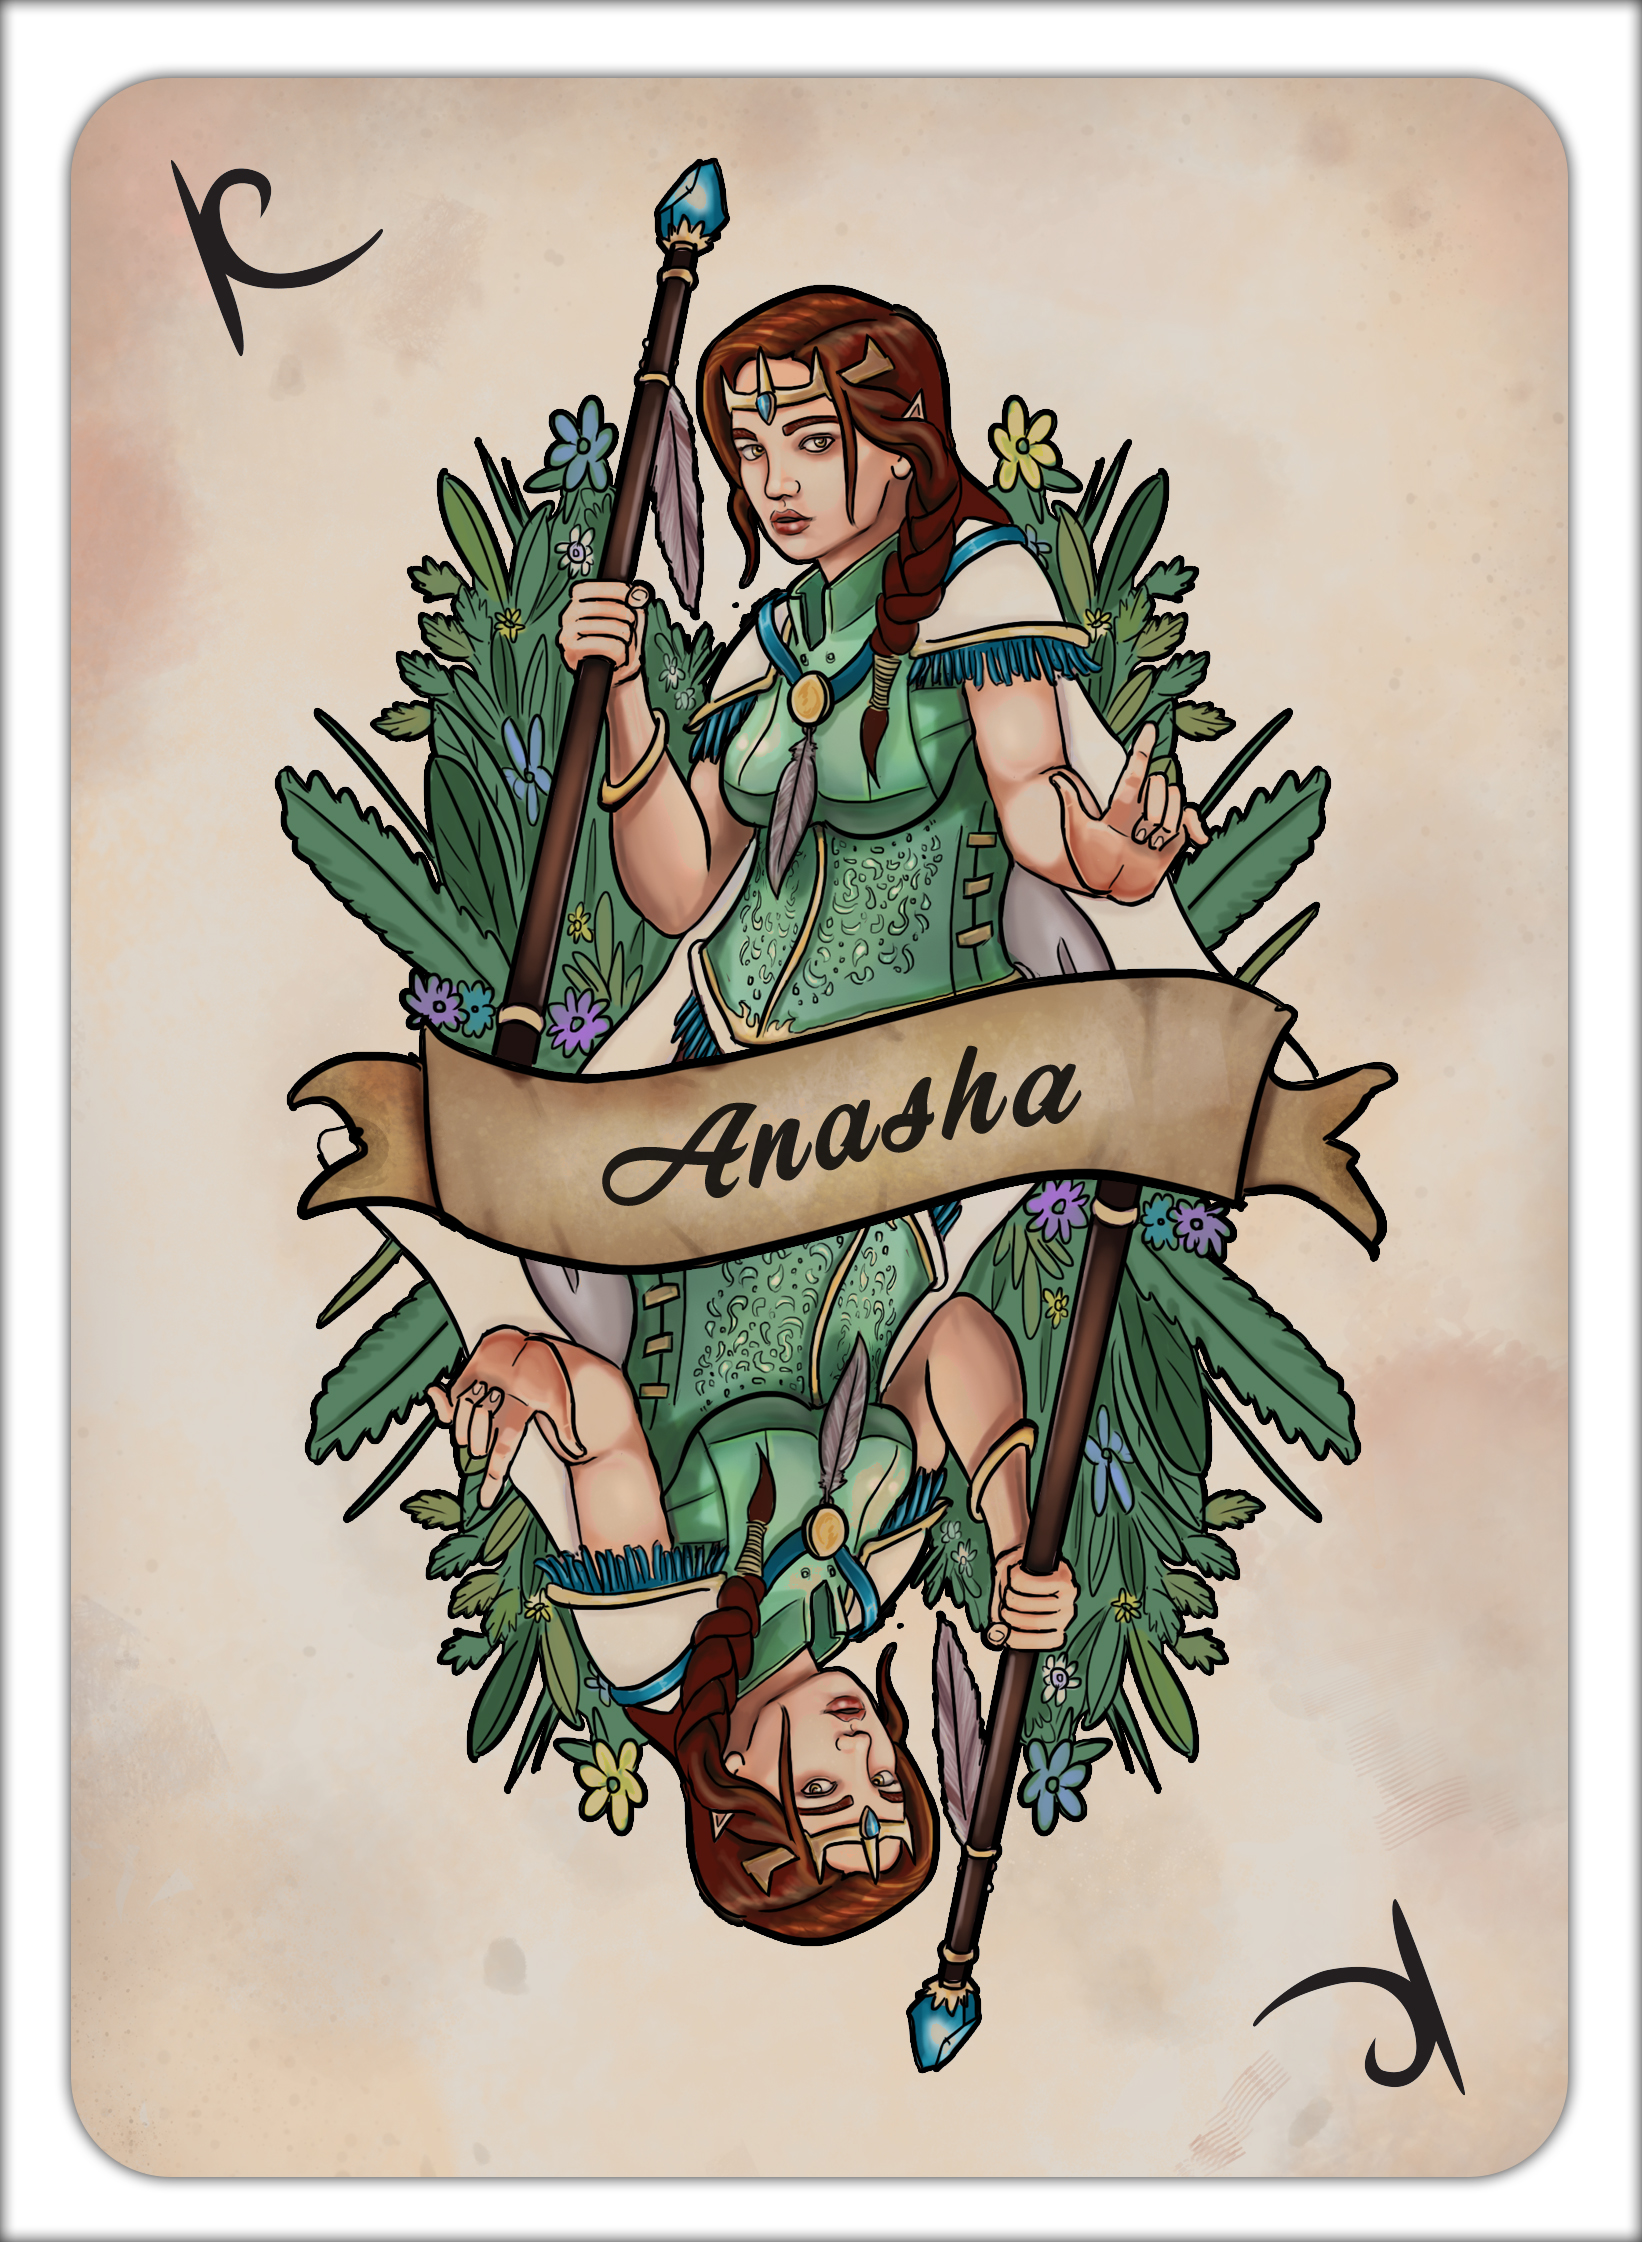 Fantasy art commission in an art nouveau style playing card by The Noble Artist. Elf character illustration